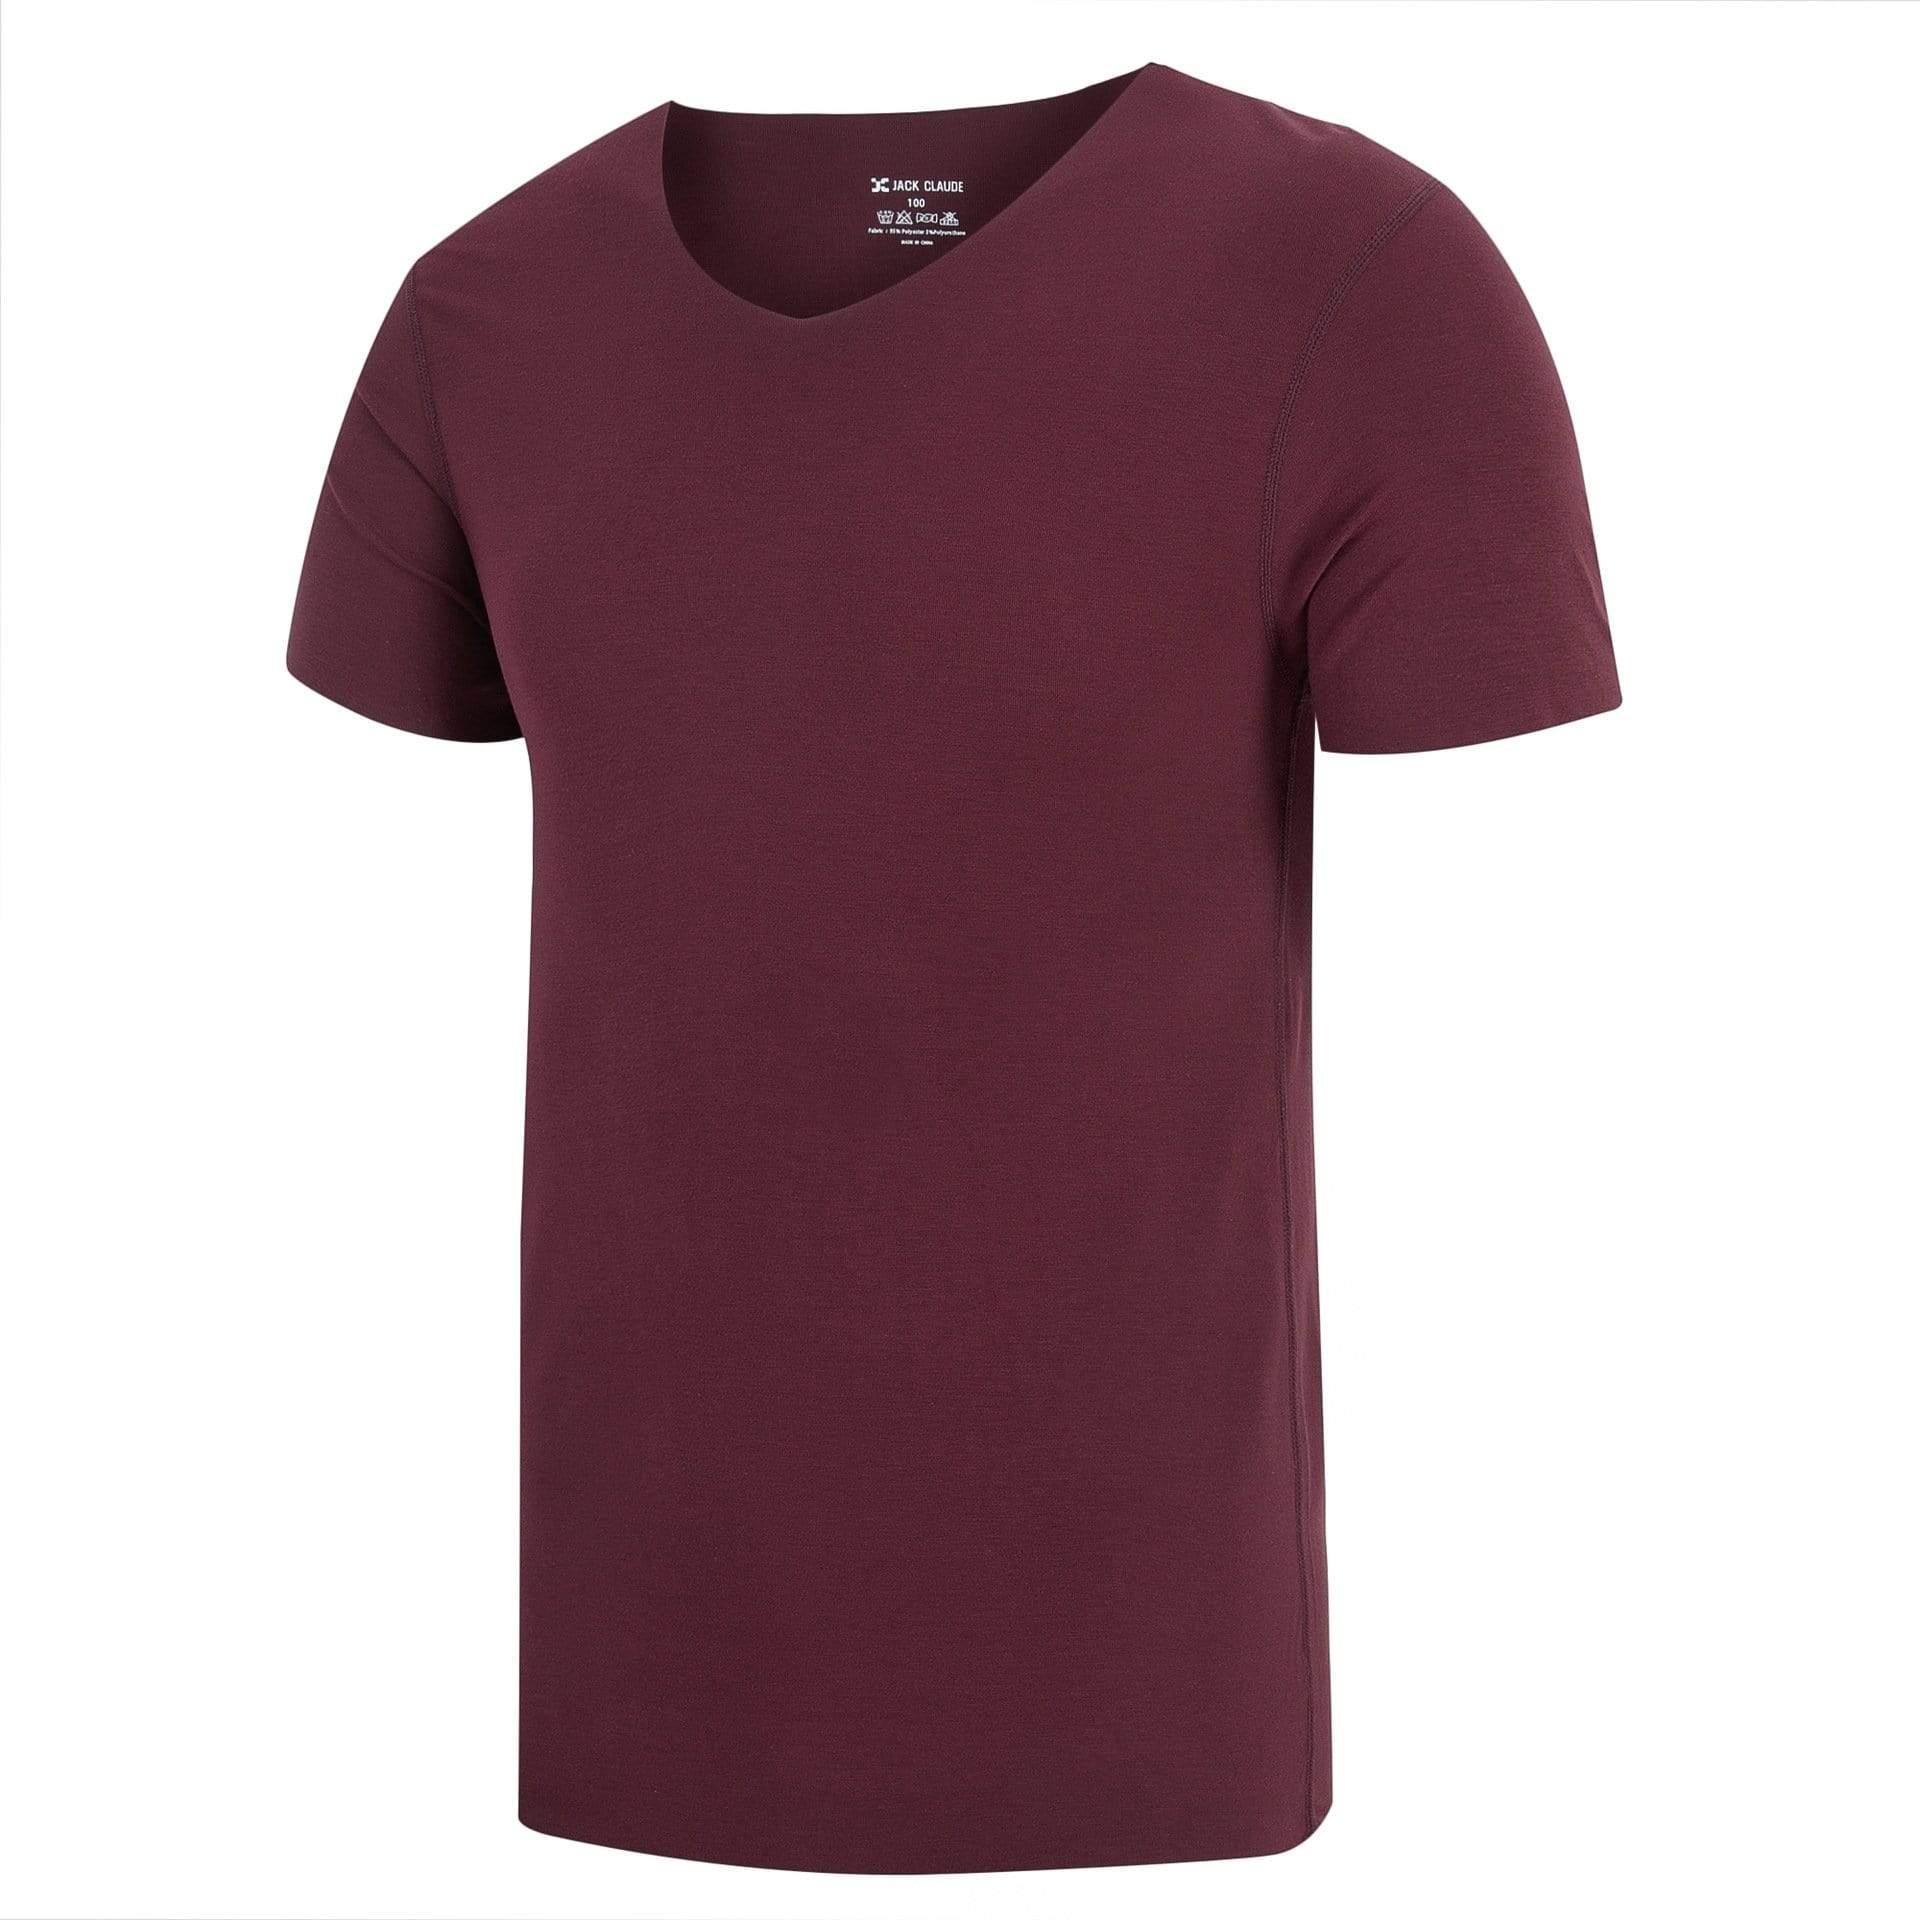 ezy2find Men's Shirts Maroon / 3XL Cut half-sleeved solid color bottoming shirtr bottoming shirt